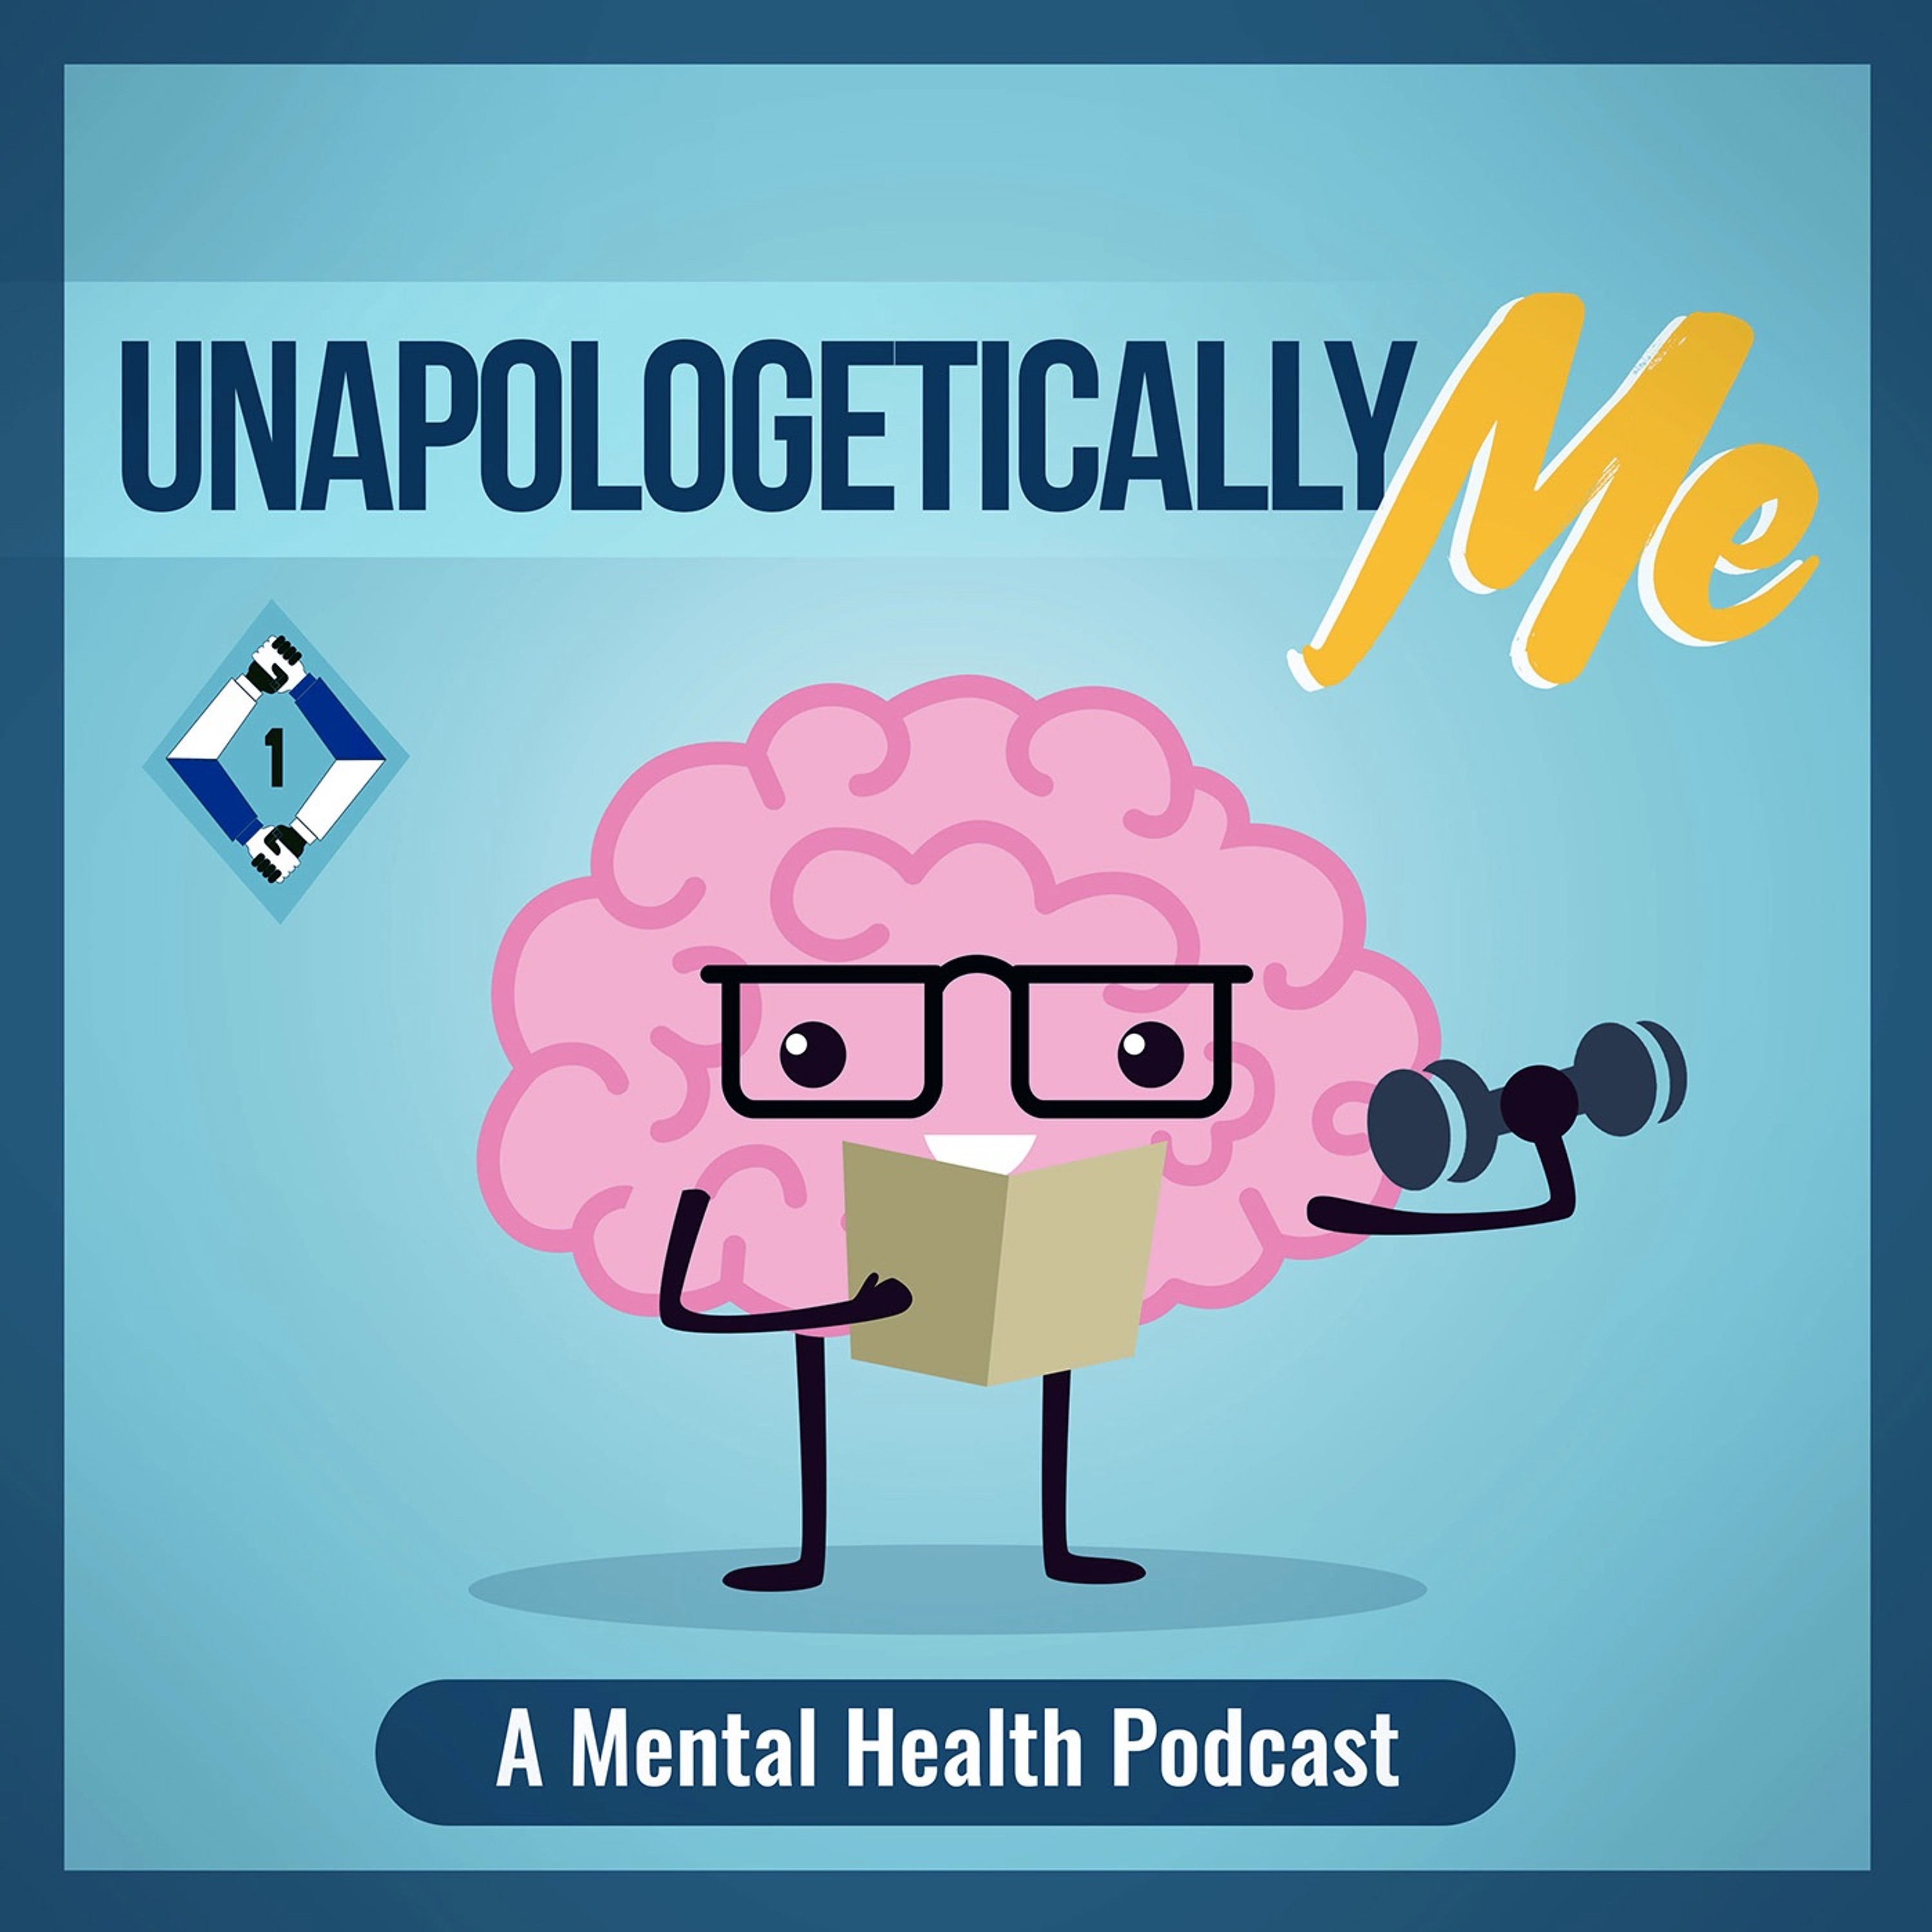 Unapologetically Me: A Mental Health Podcast - The Joshua York Legacy Foundation